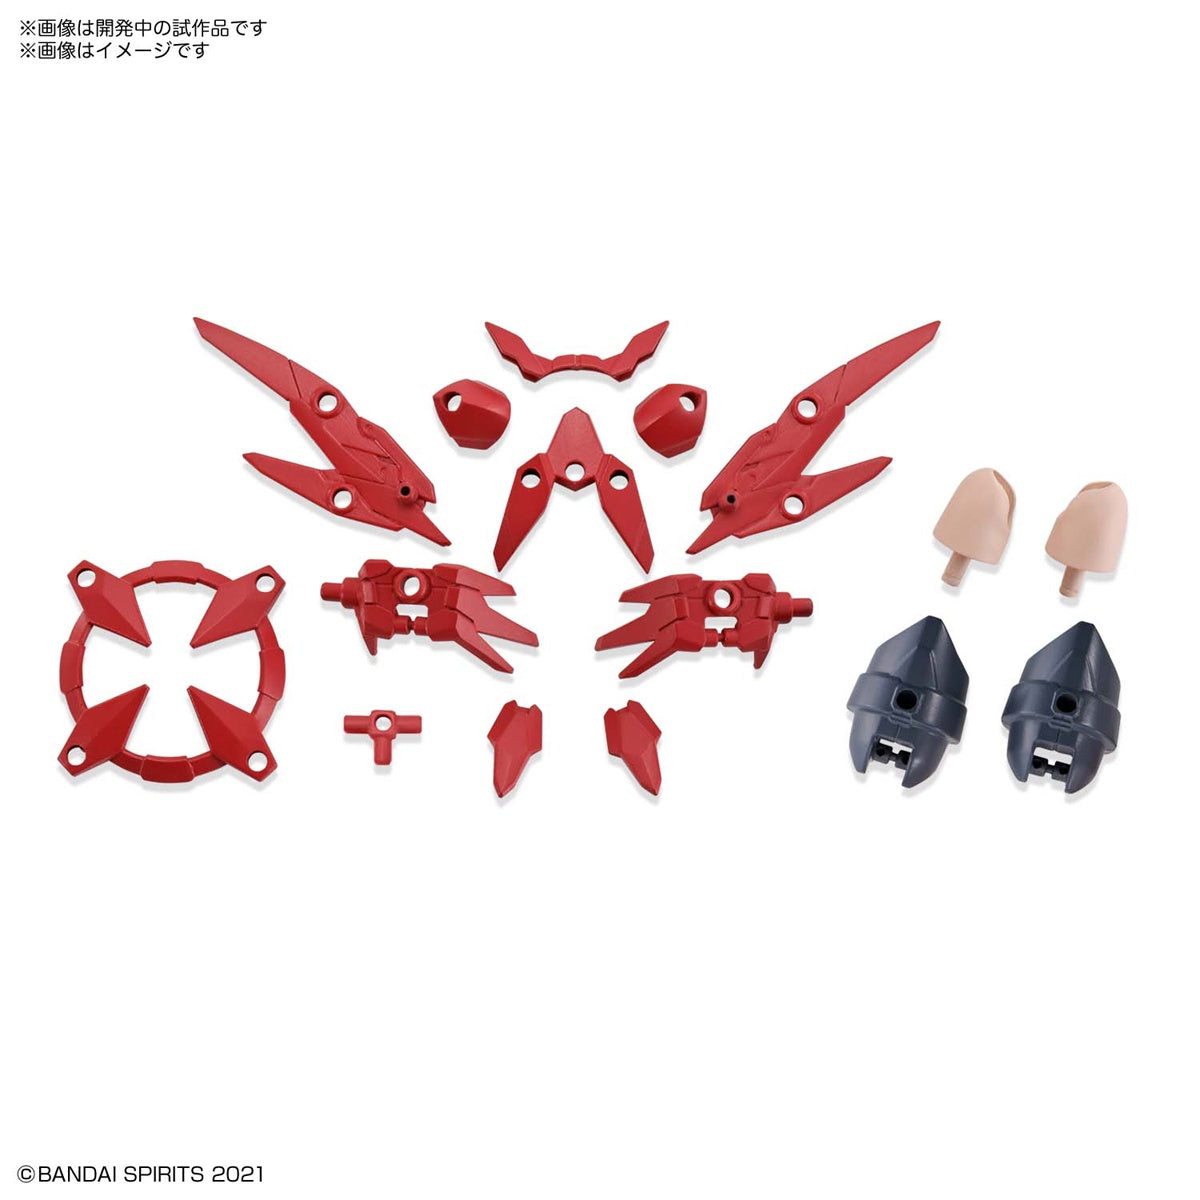 Option Parts 2 (Flight Armour) 30 Minutes Sisters Accessory Model Kit #5061922 by Bandai